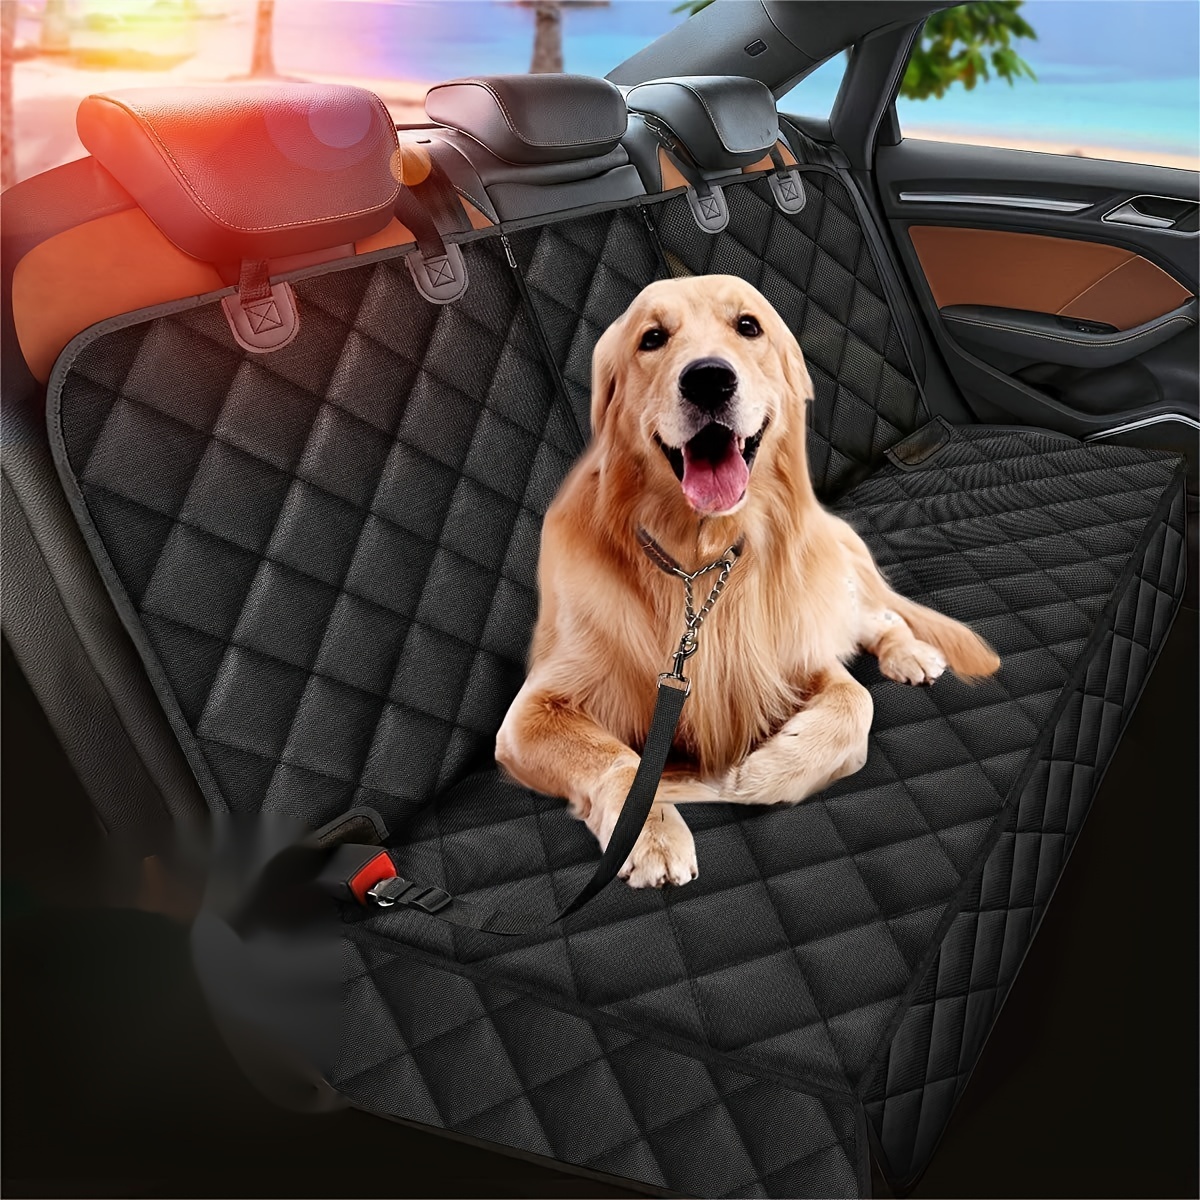 OKMEE 5 - in-1 Dog Car Seat Cover, Scratchproof Pet Car Seat Cover with  Mesh Window/2 Seat Belts, Convertible Dog Hammock Nonslip Dog Back Seat  Protector for Cars Trucks SUV 